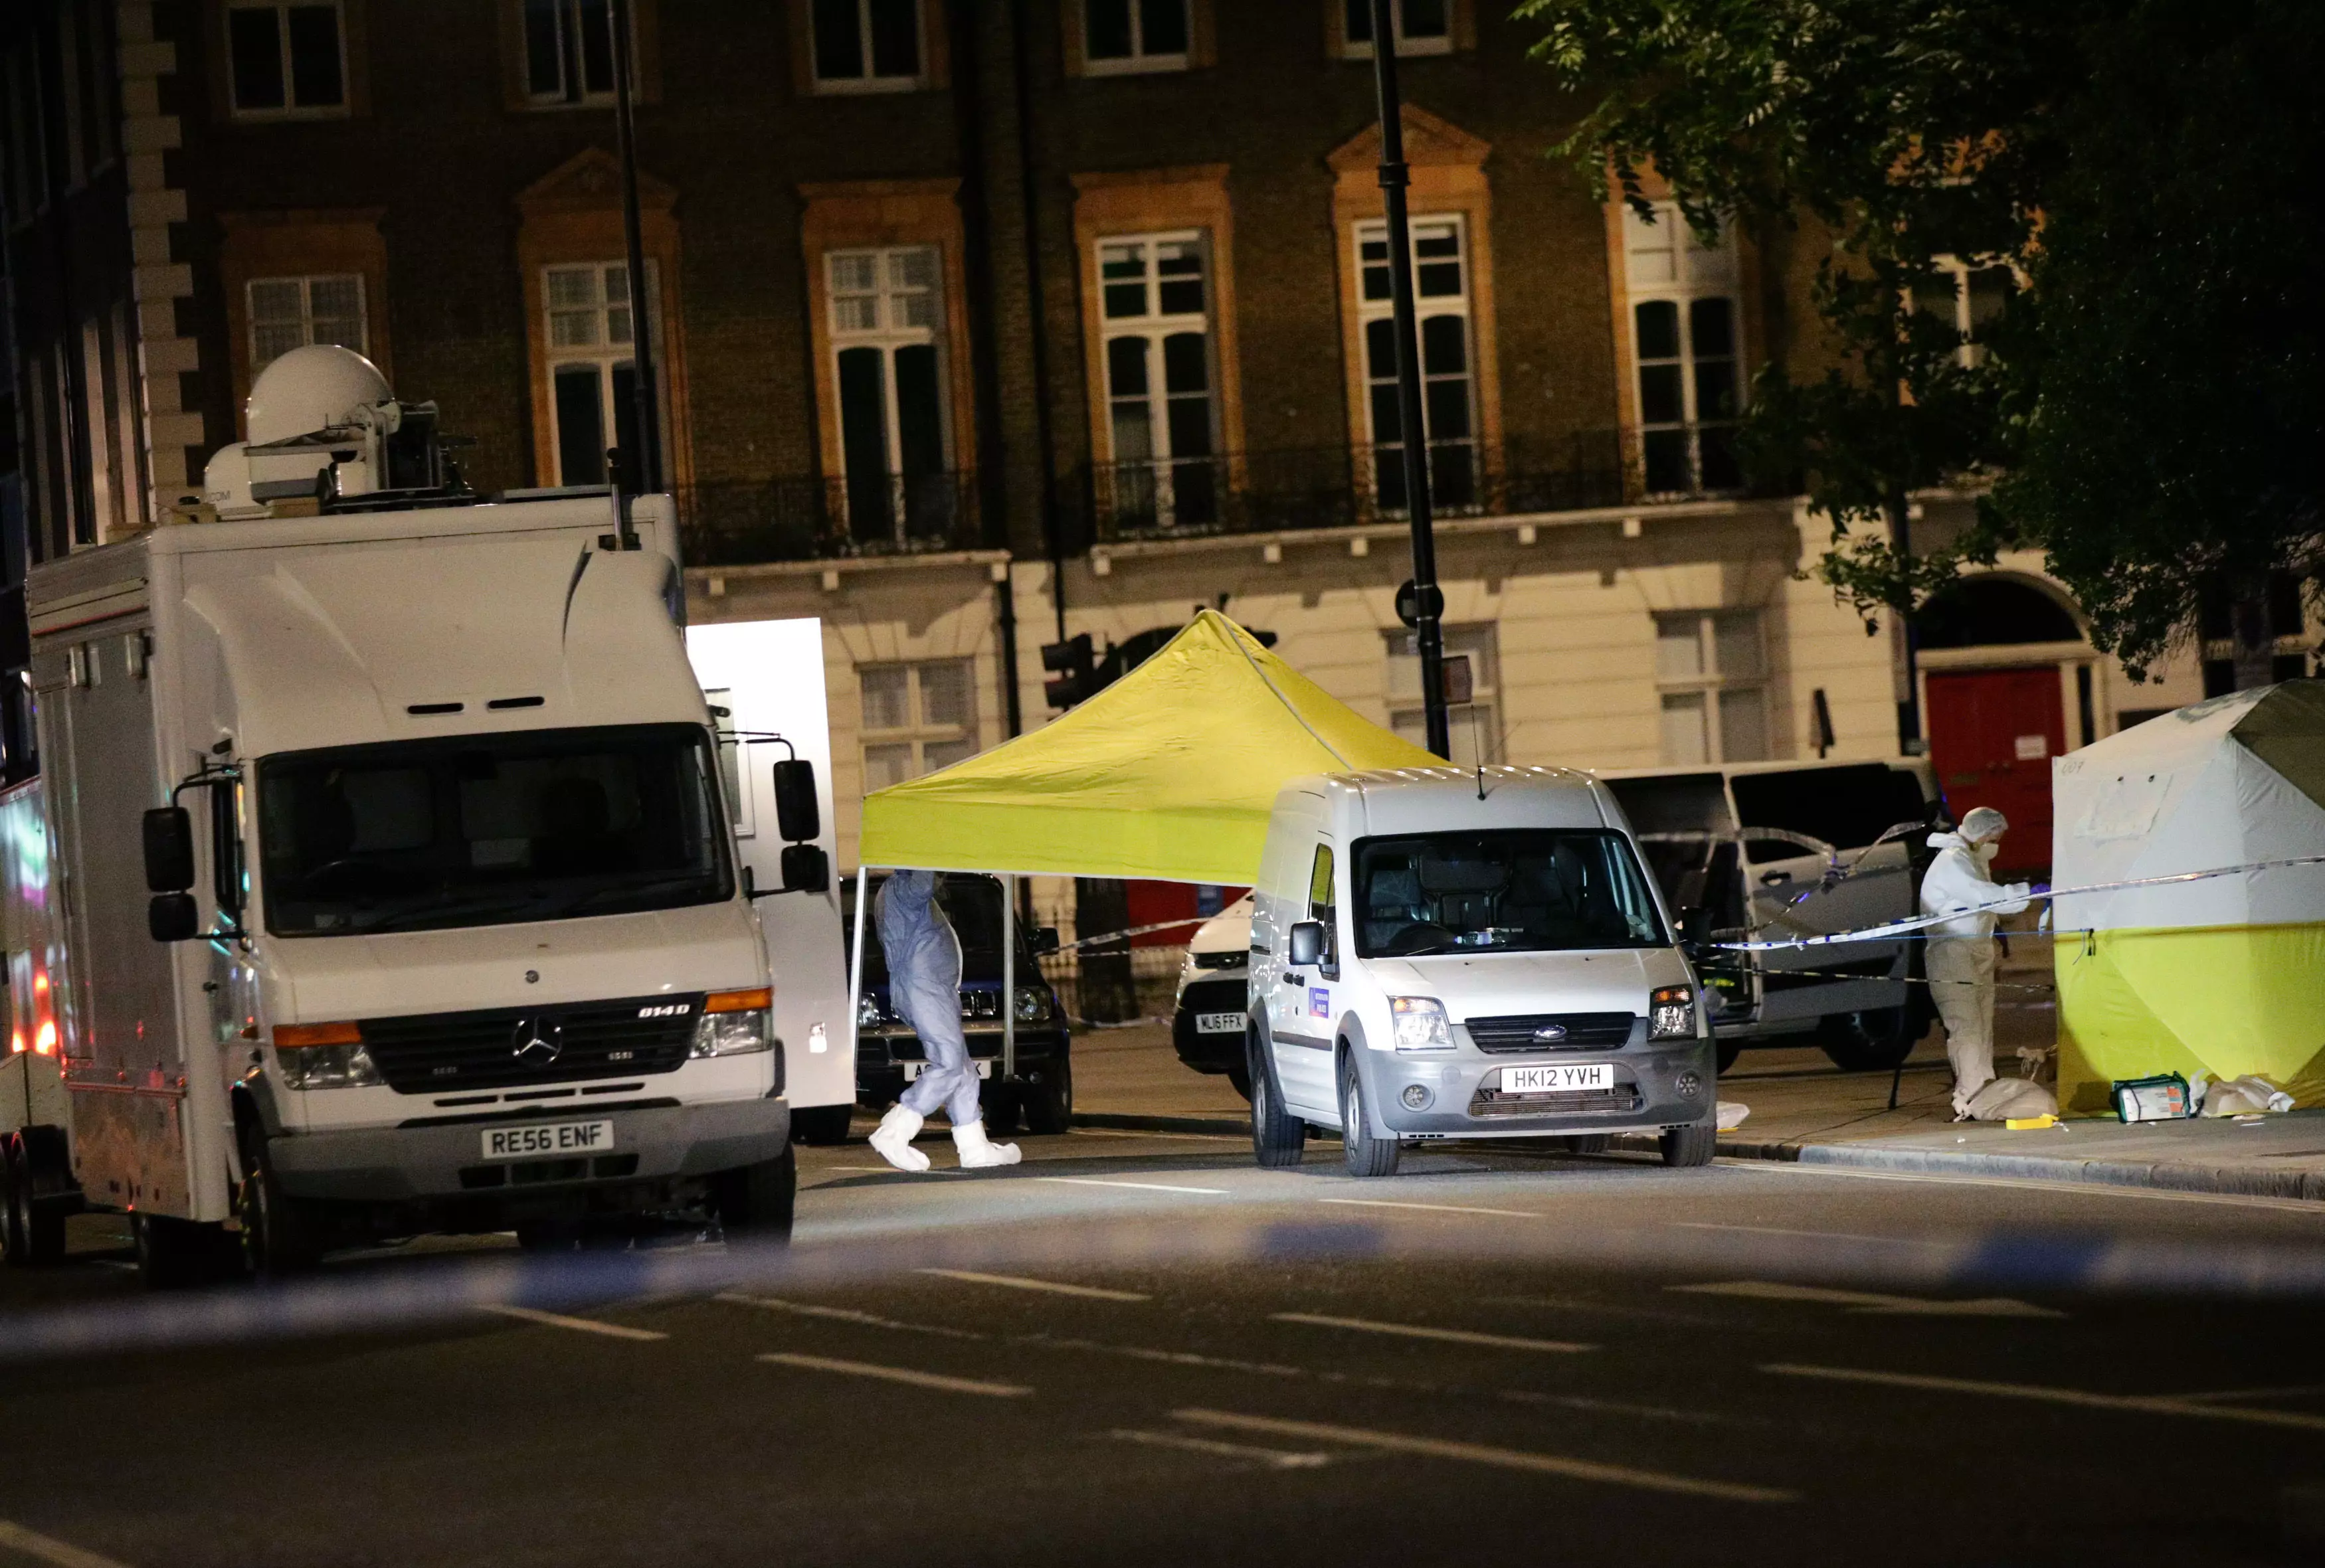 One Woman Killed And More People Injured In London Knife Attack